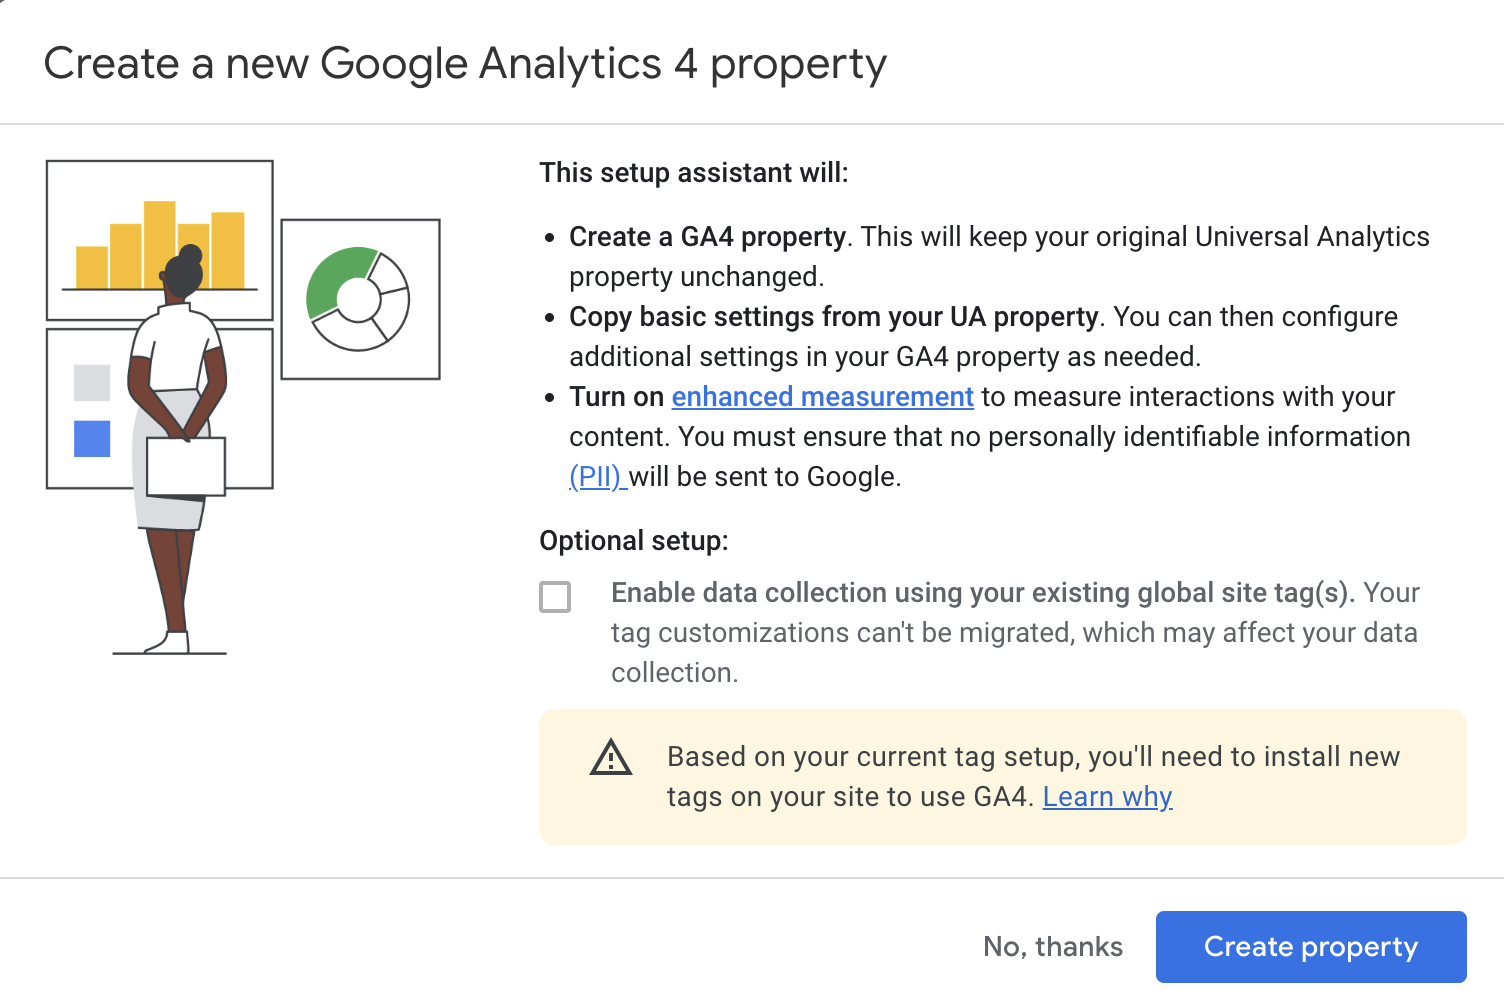 Create a new GA4 property - Enable data collection using existing global site tag